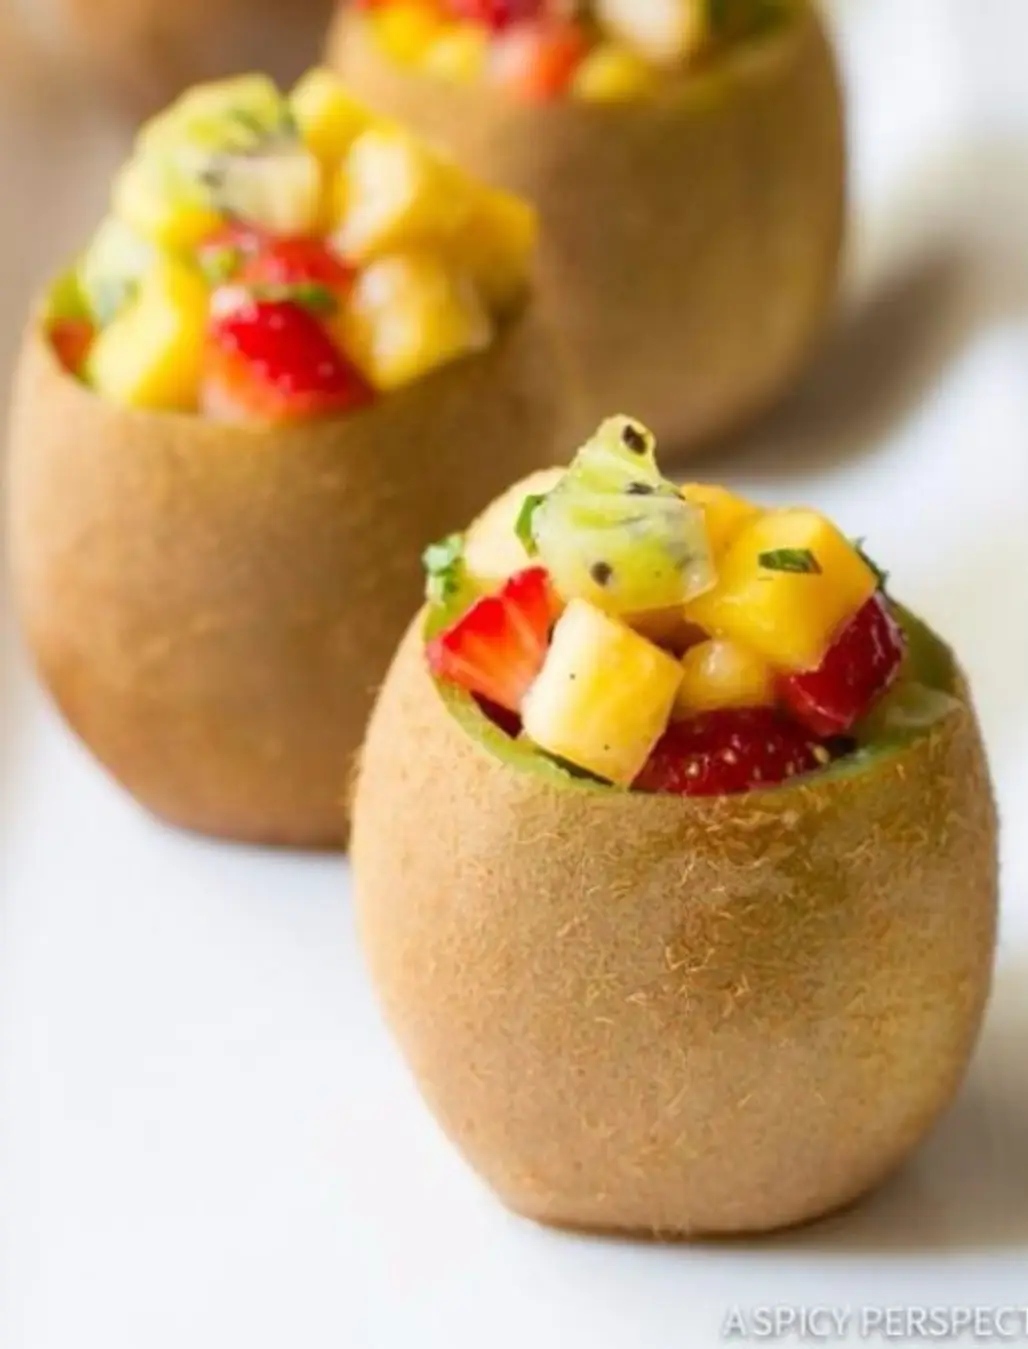 Tropical Fruit Salad with Vanilla Bean in Kiwi Cups